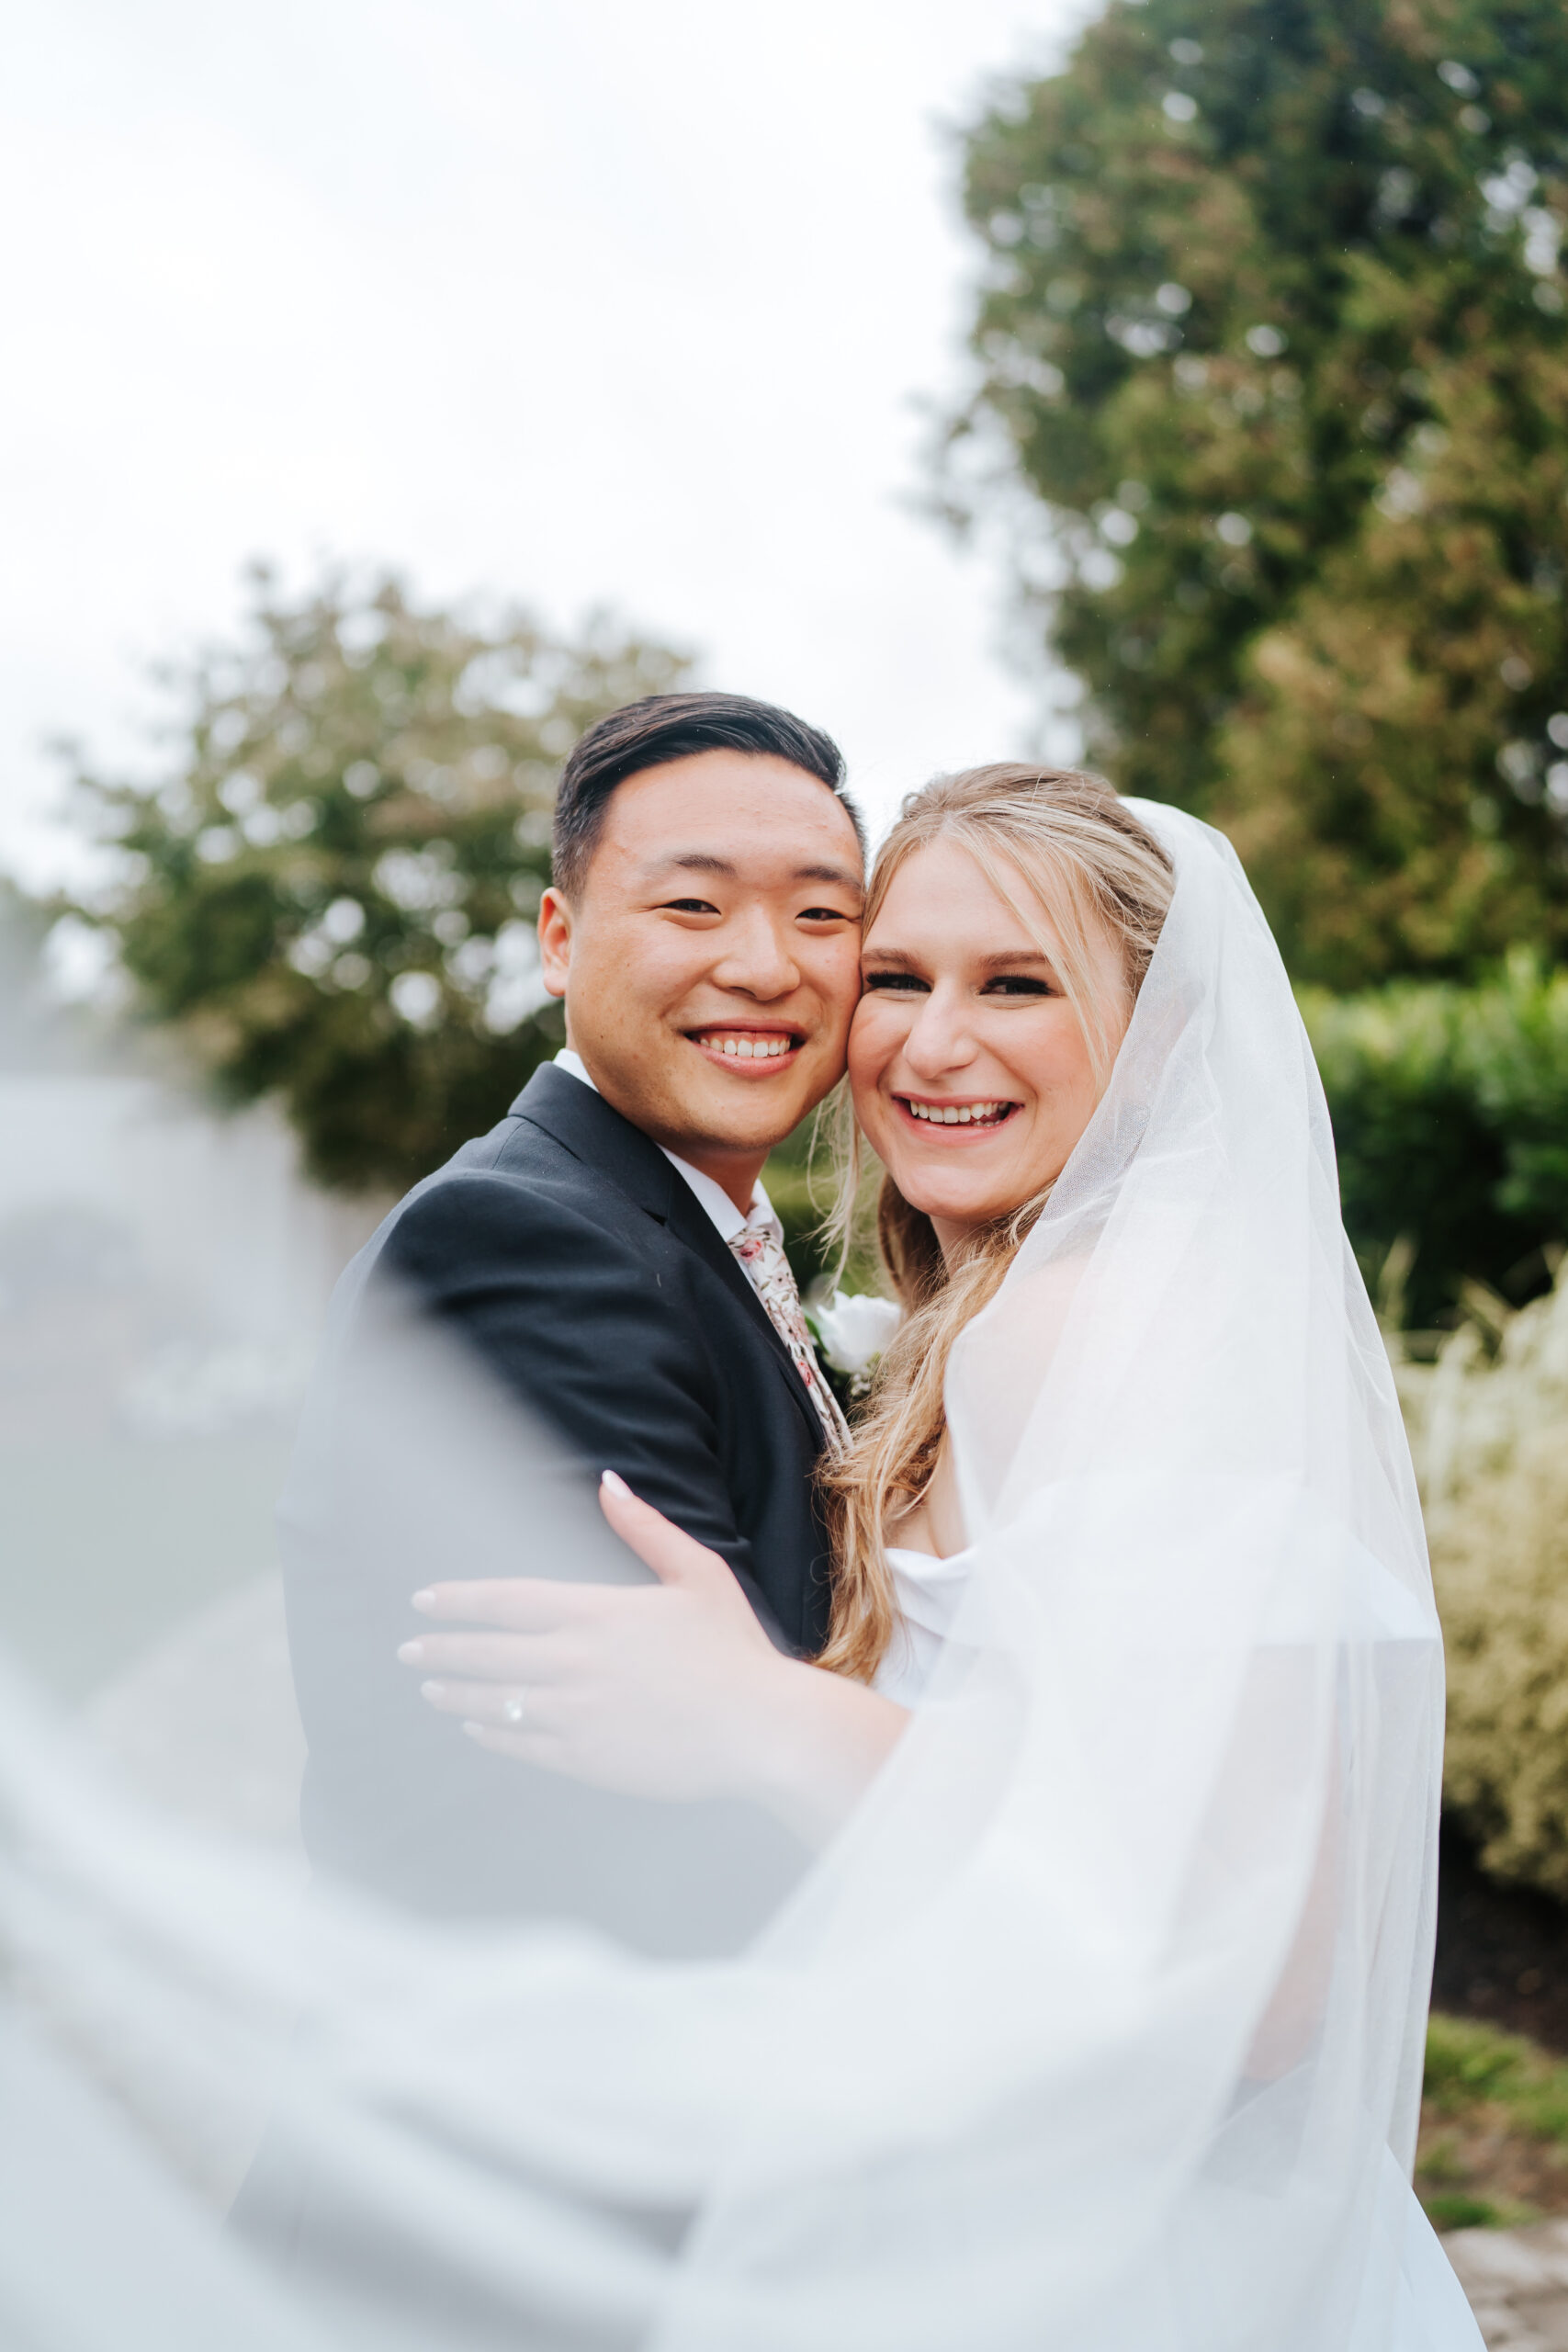 Fall Wedding at The Warrington PA by Maryland Wedding Photographer Brenna Marie Photography